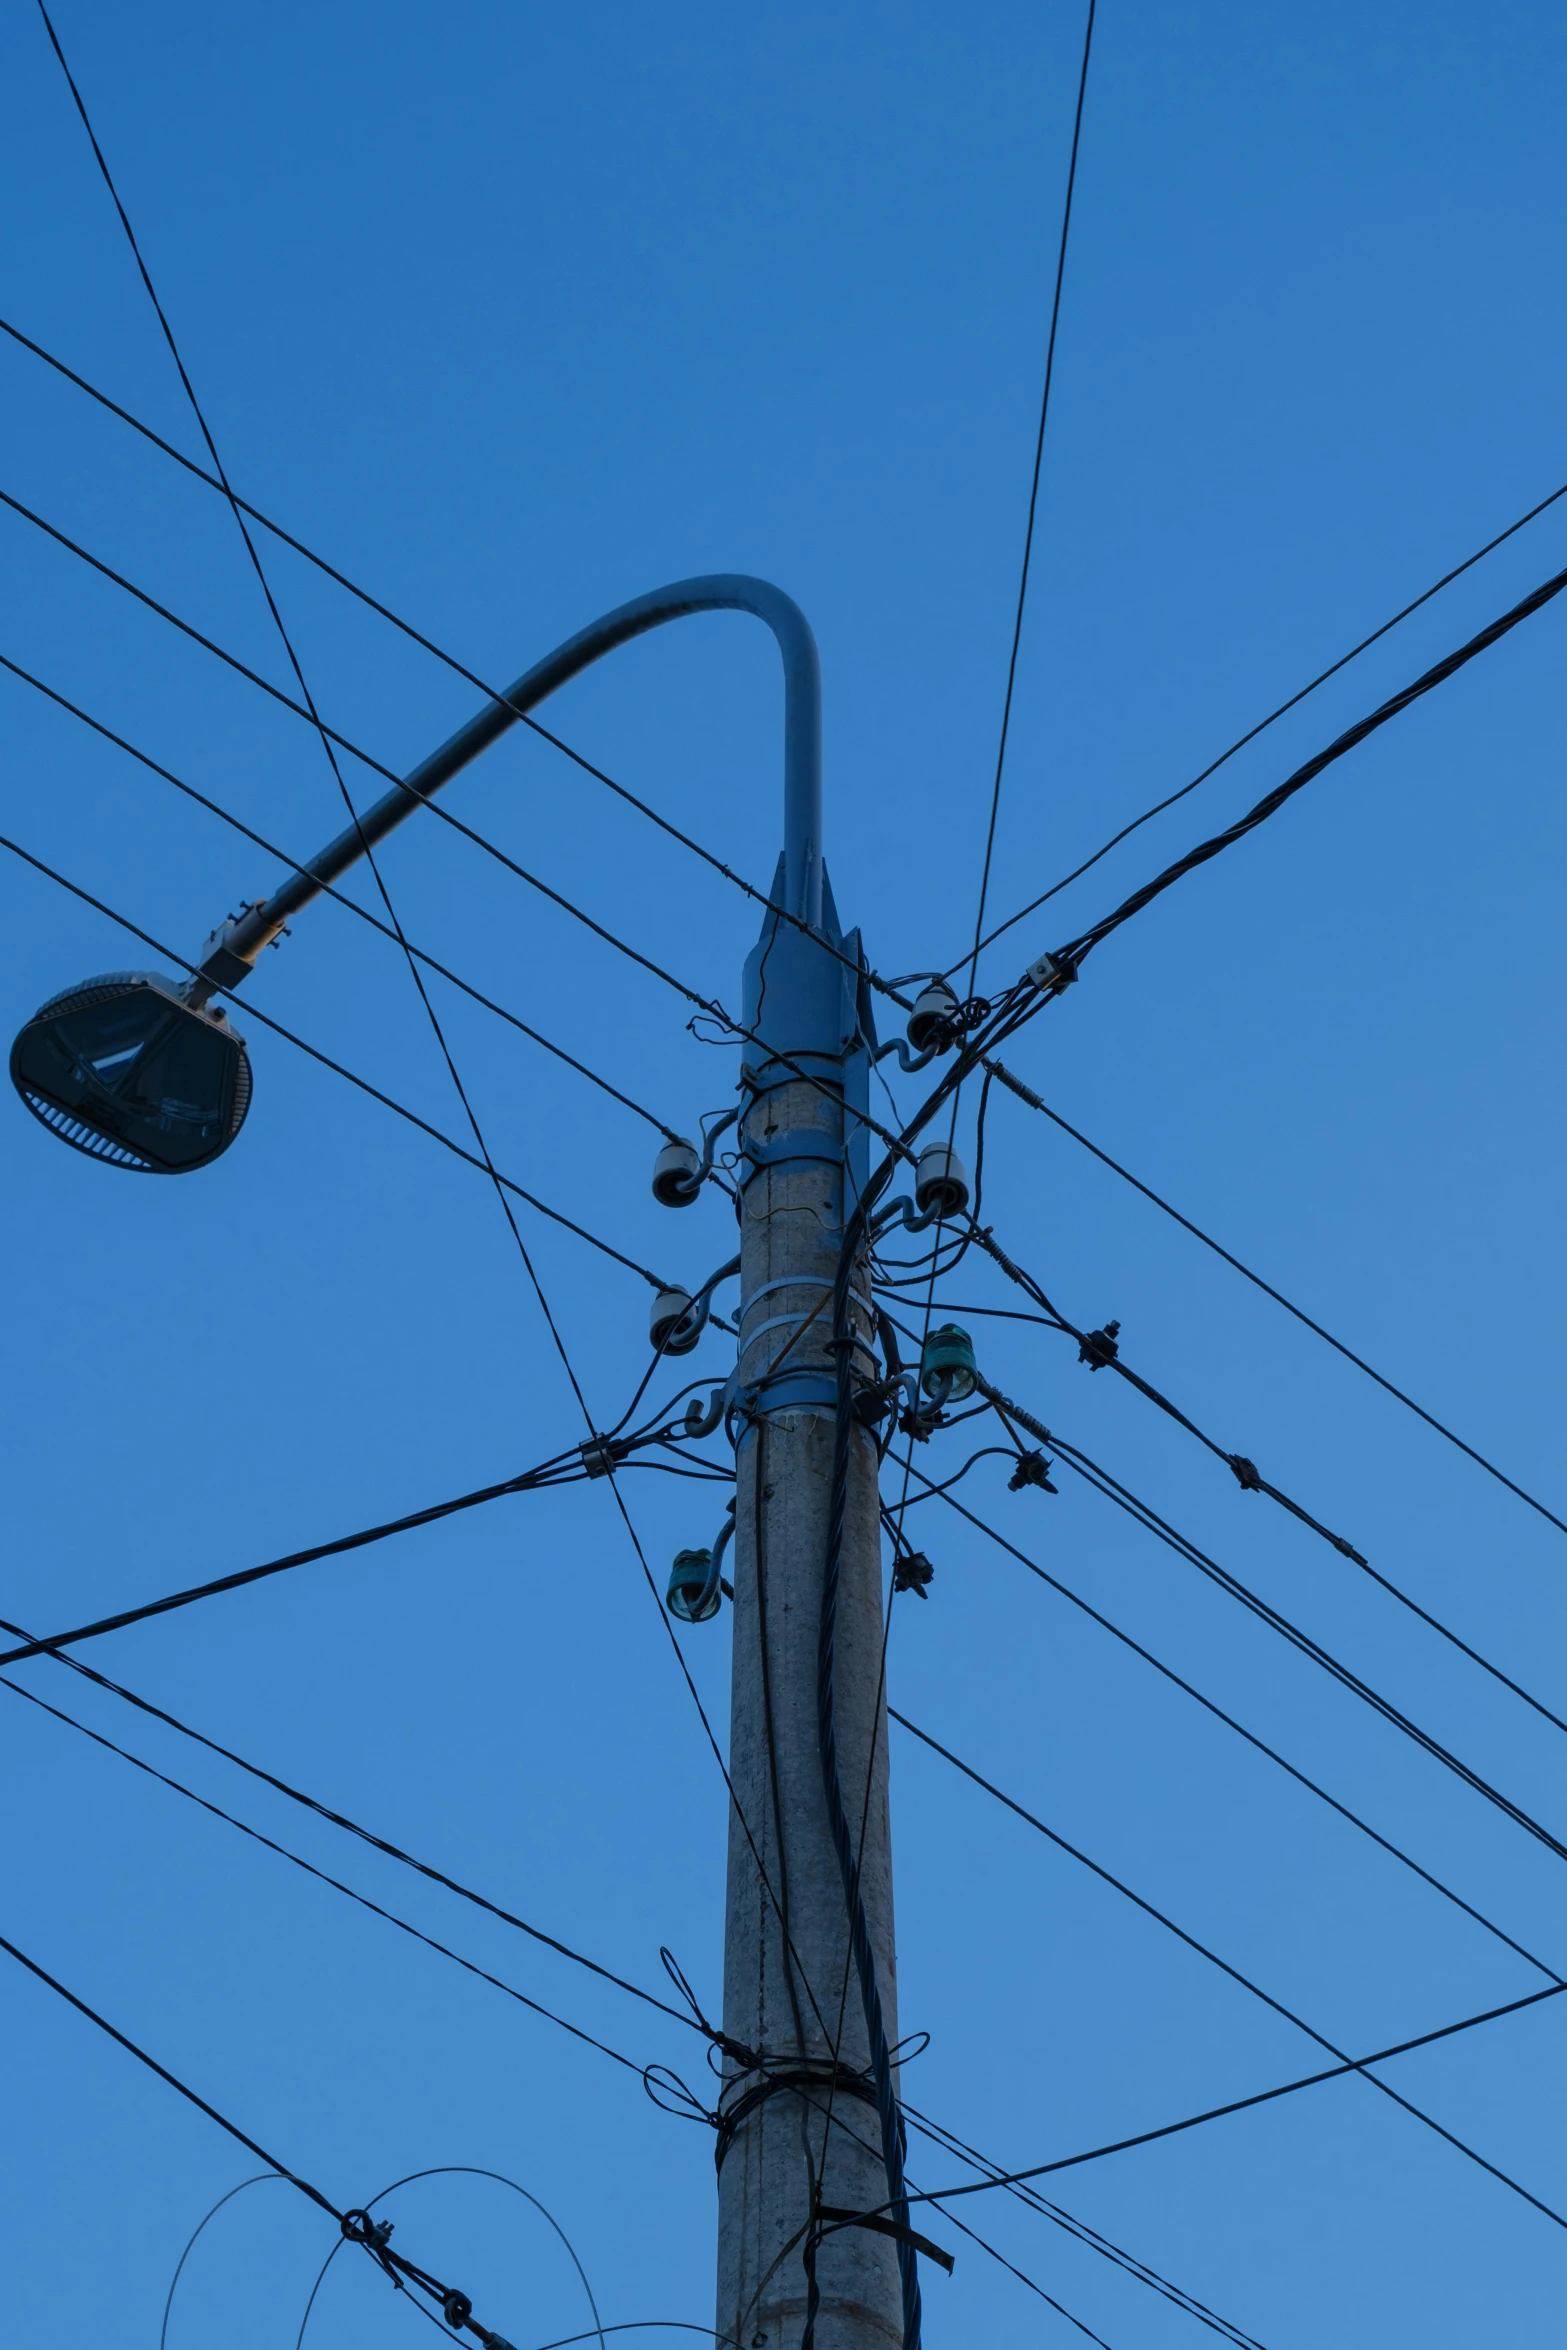 an electric pole and street lamp in silhouette against the blue sky